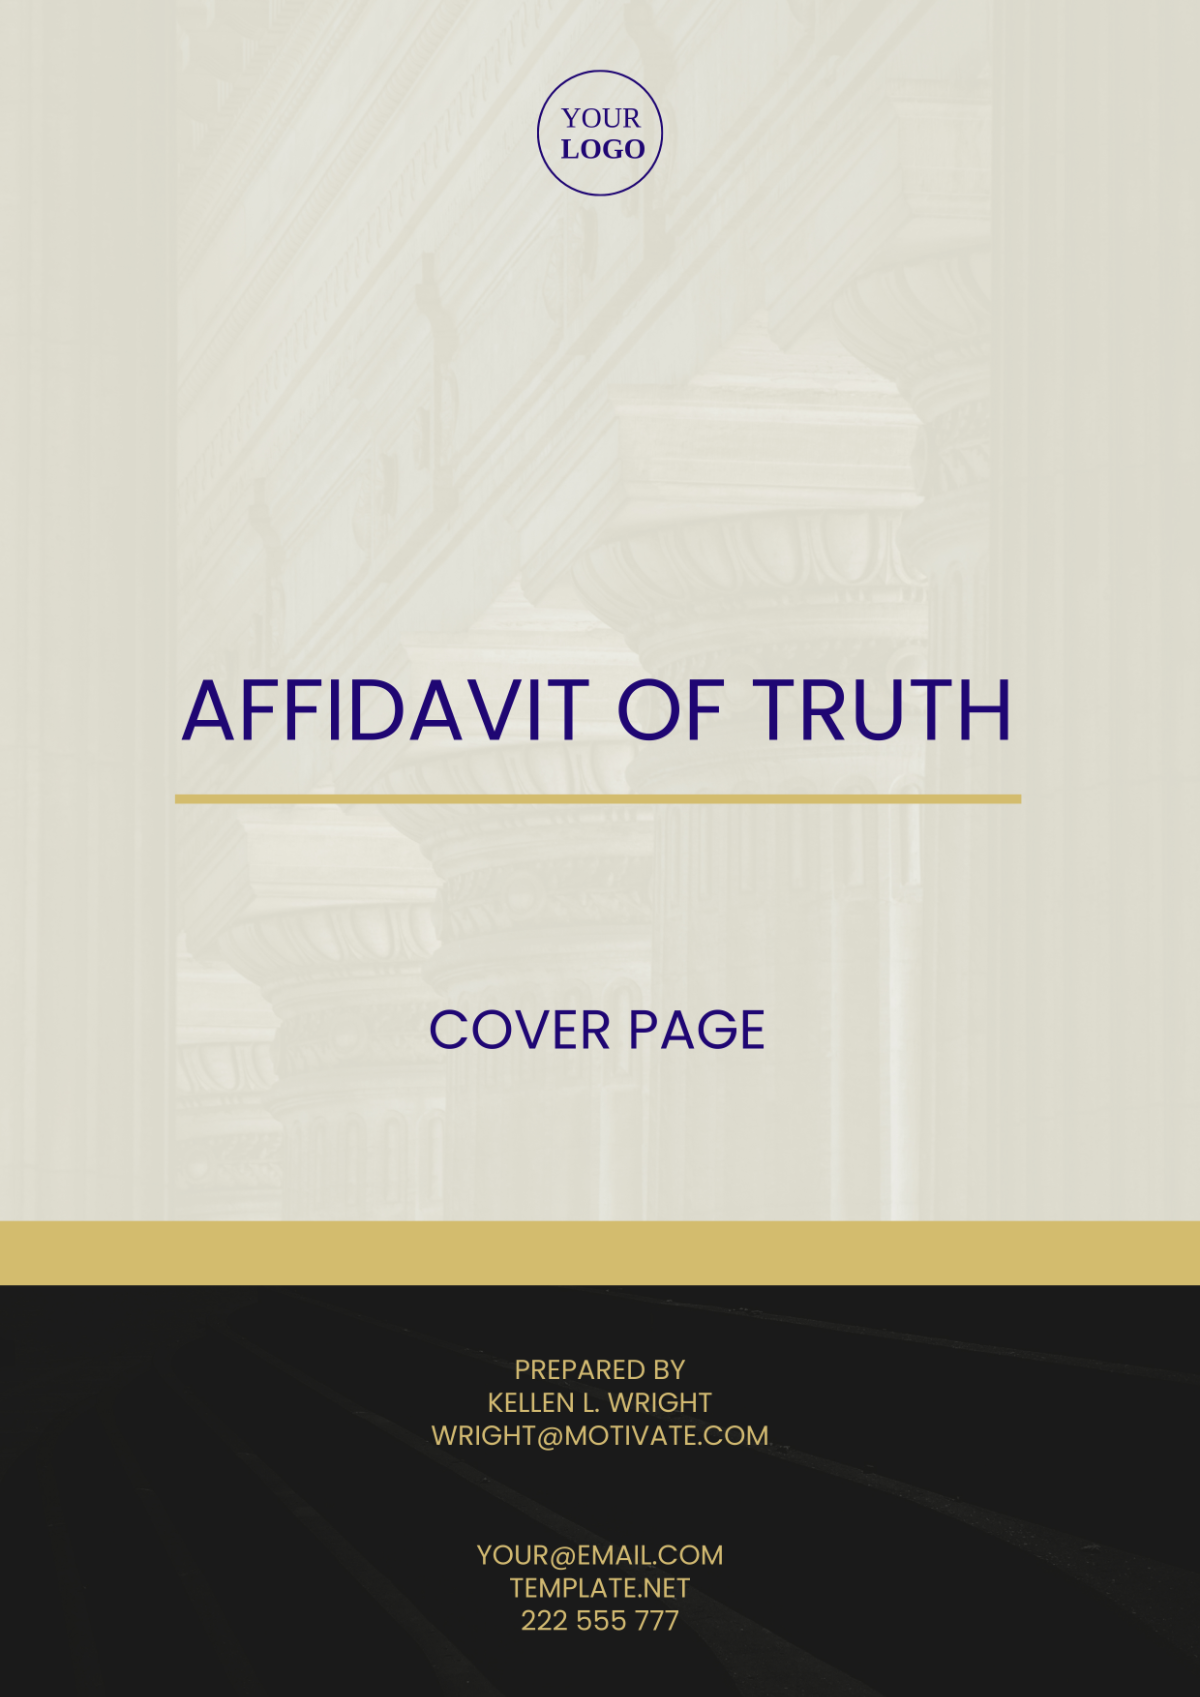 Affidavit of Truth Cover Page